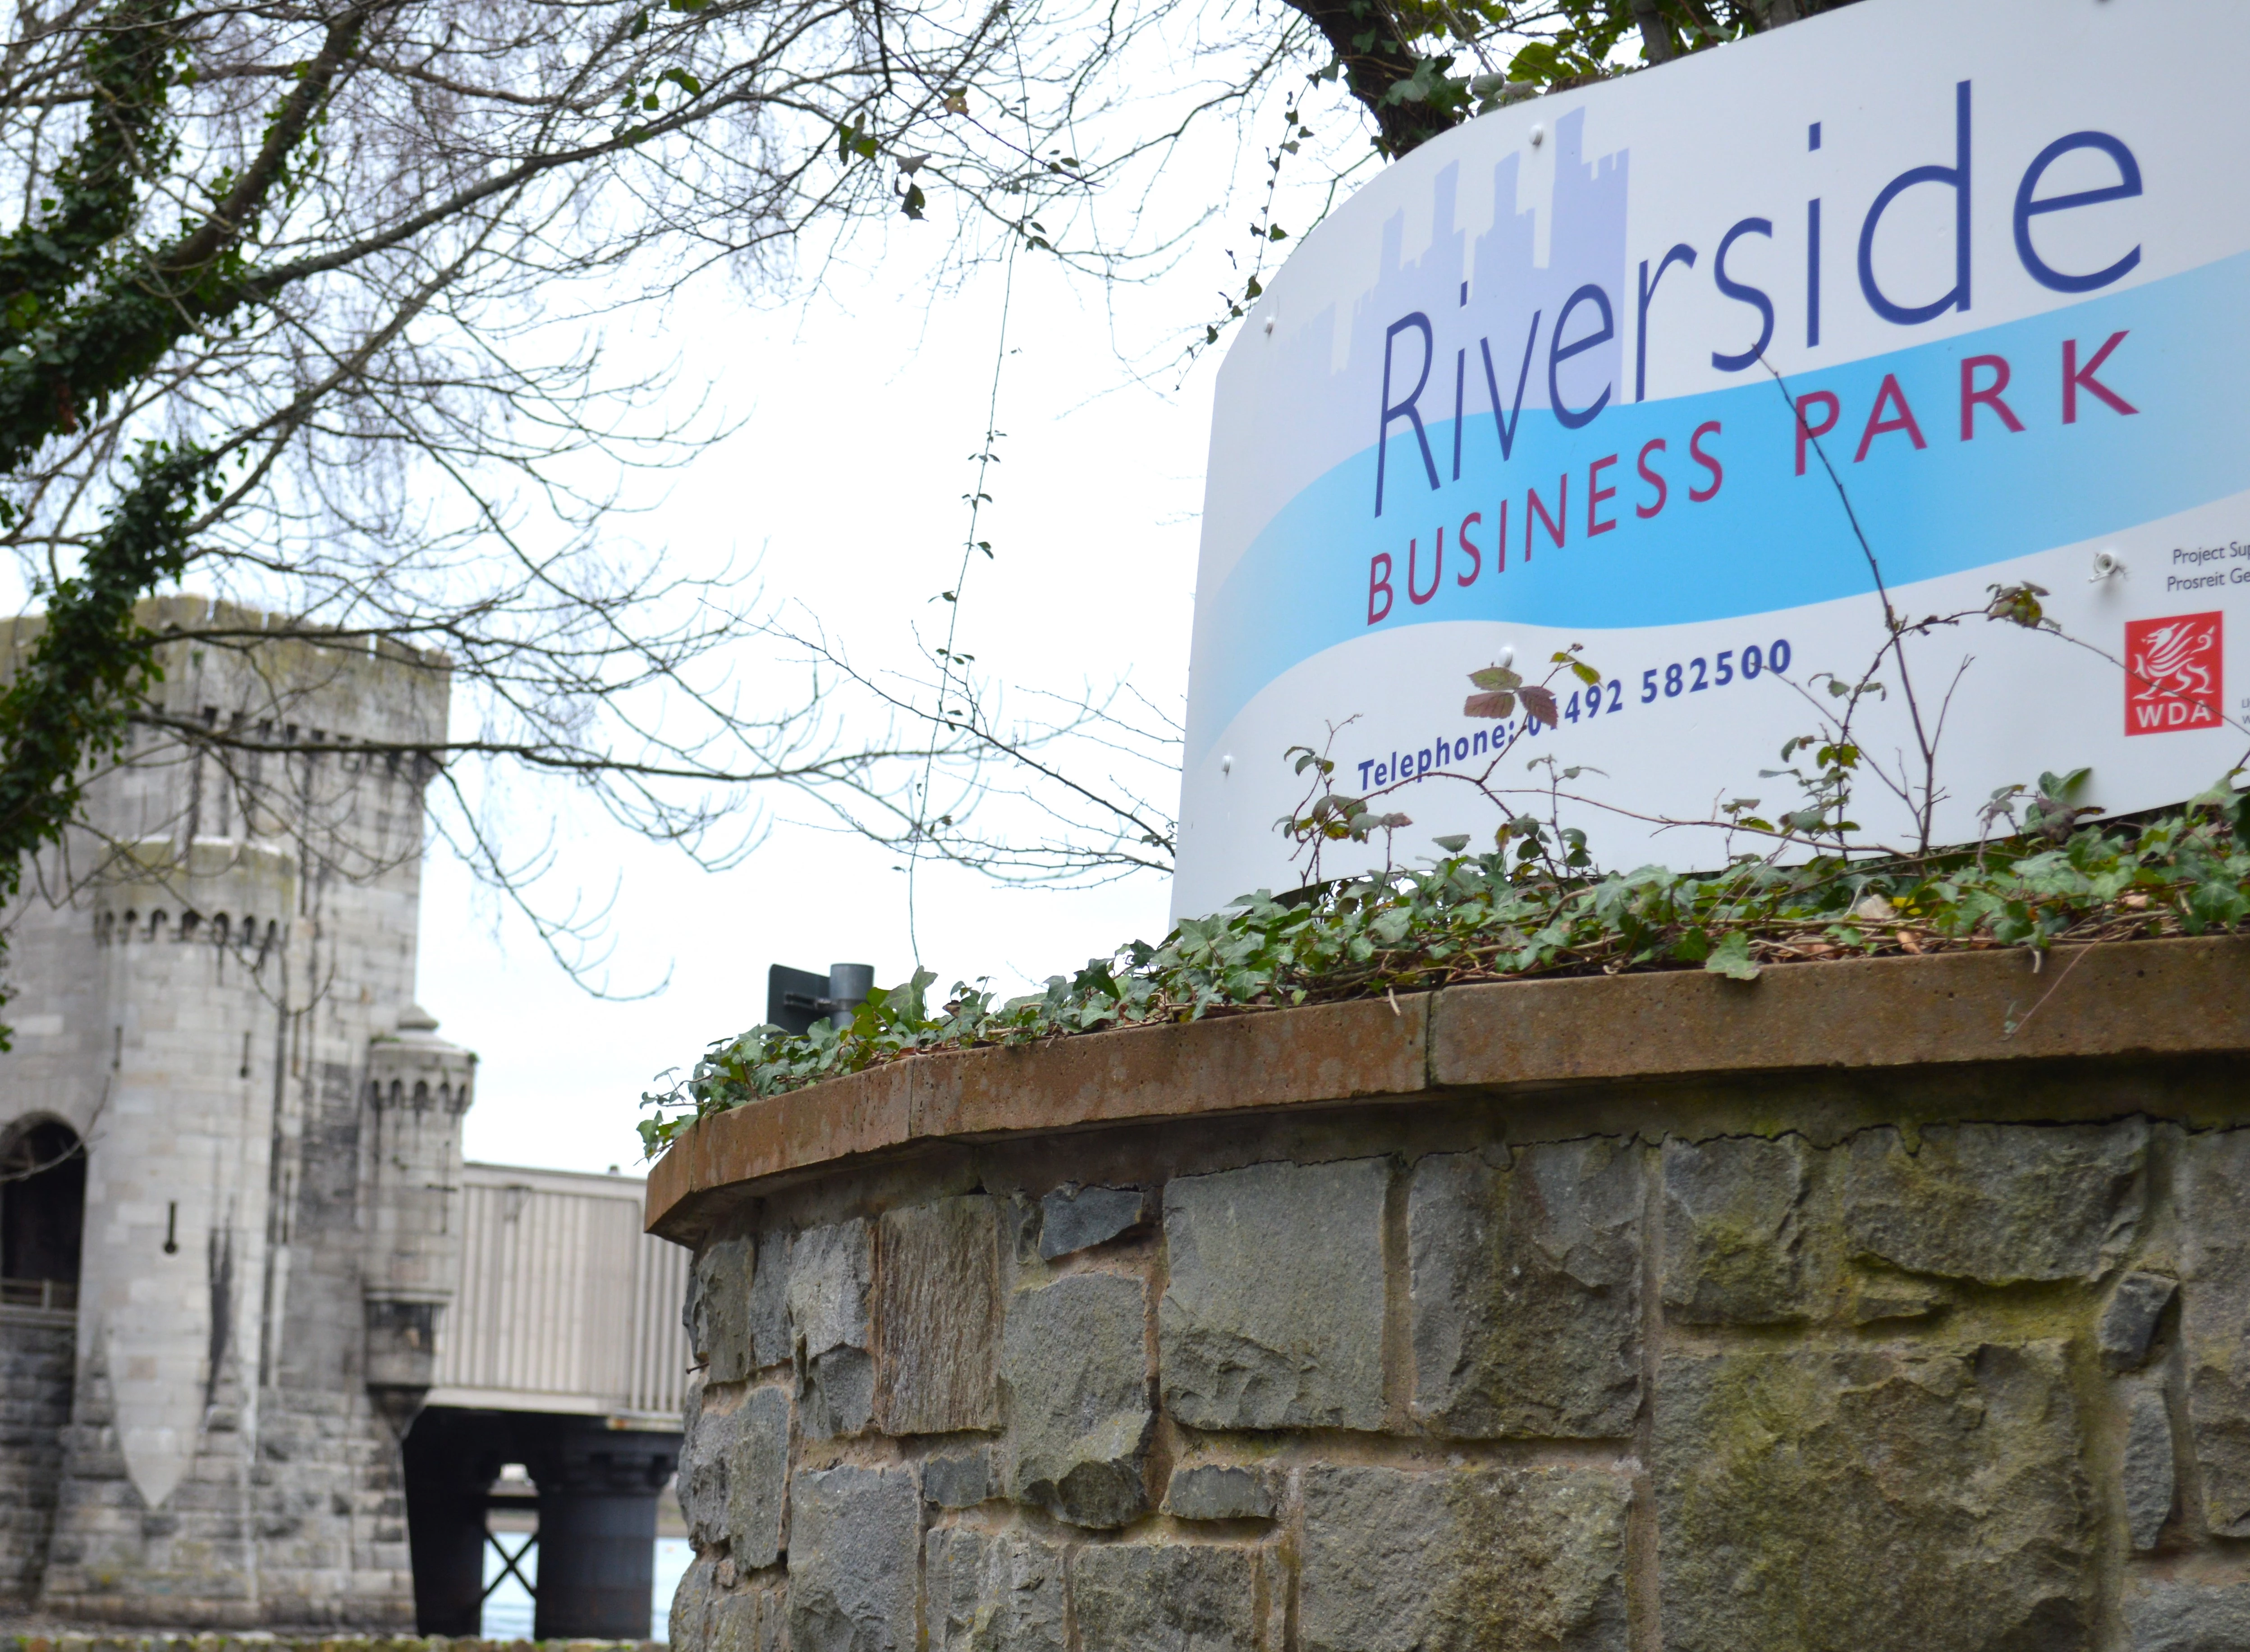 Riverside Business Park is home to the new CBT clinic 